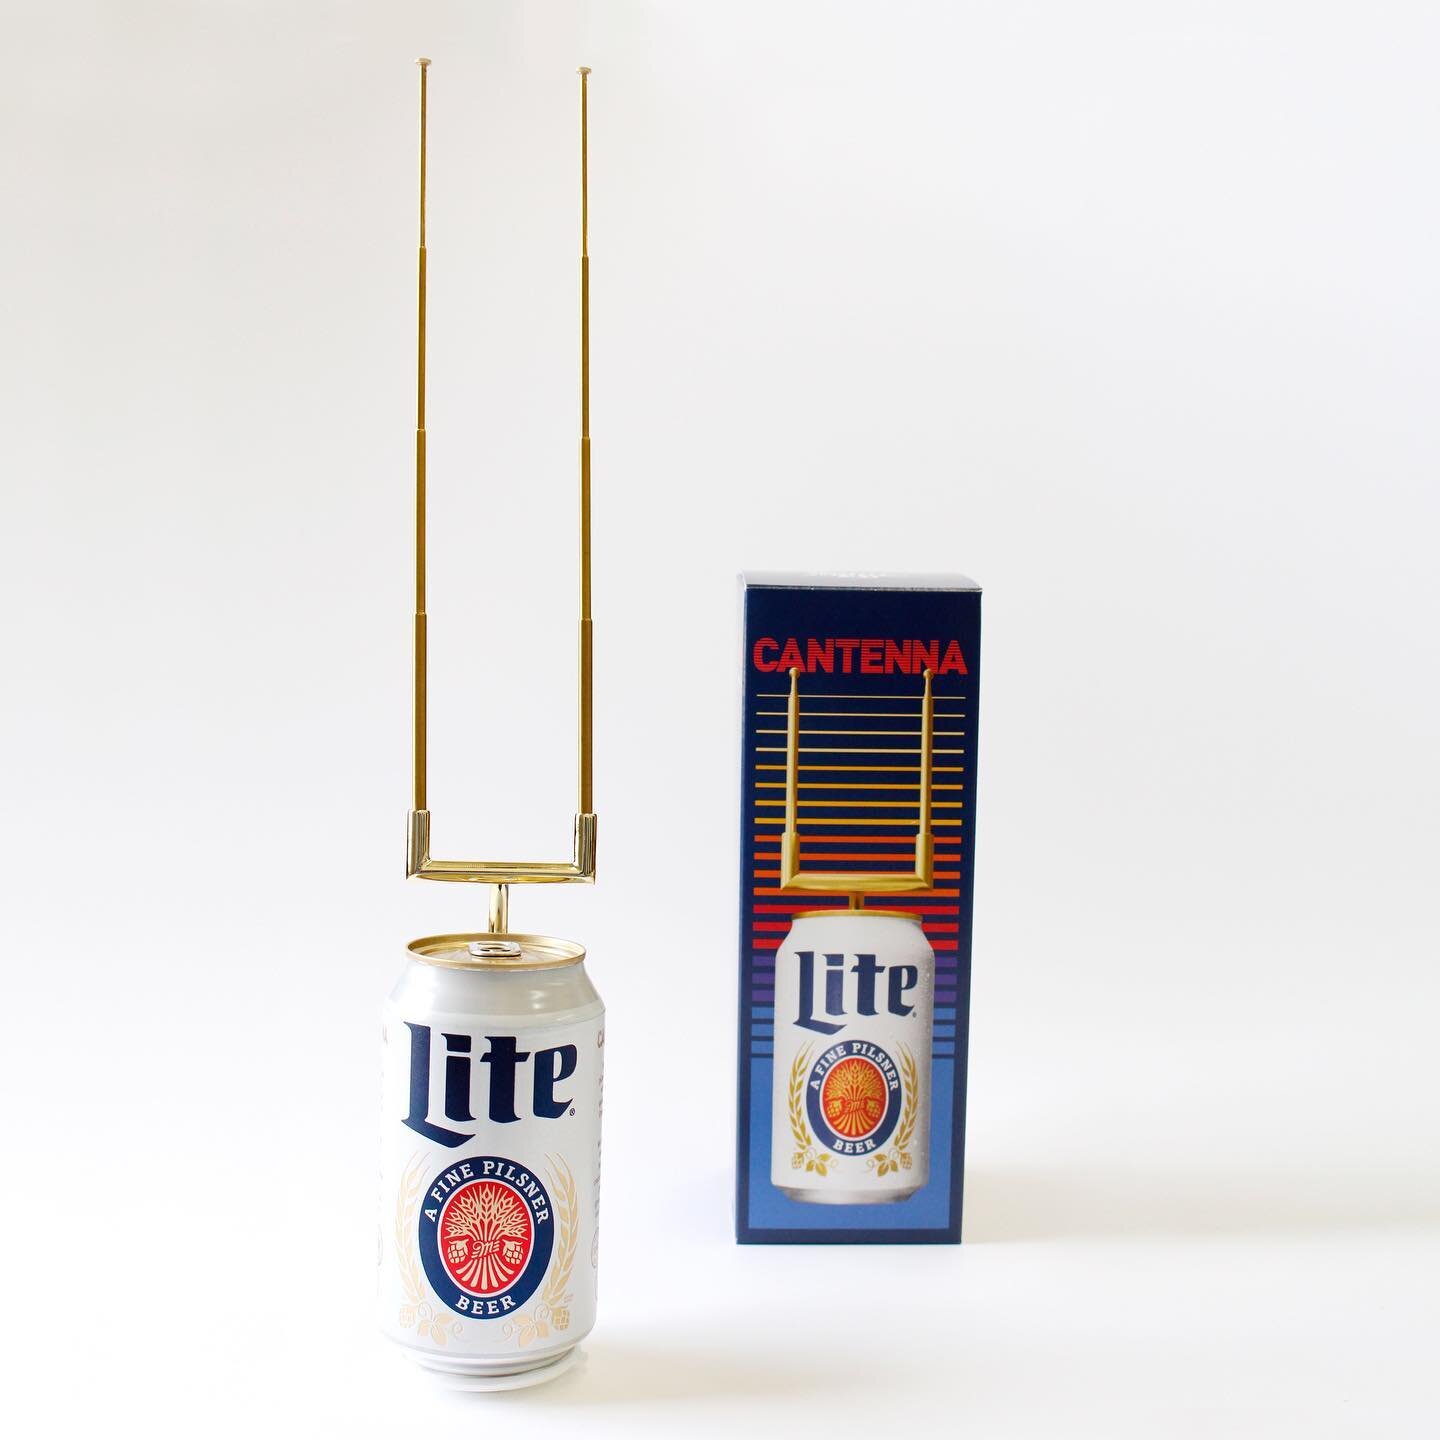 It's 3 months until the start of the NFL season! Looking back at this Miller Lite &ldquo;Cantenna&rdquo; that doubled as a beer and digital antenna allowing cord-cutters to watch free NFL games. We worked on this project in collaboration with @mssngp